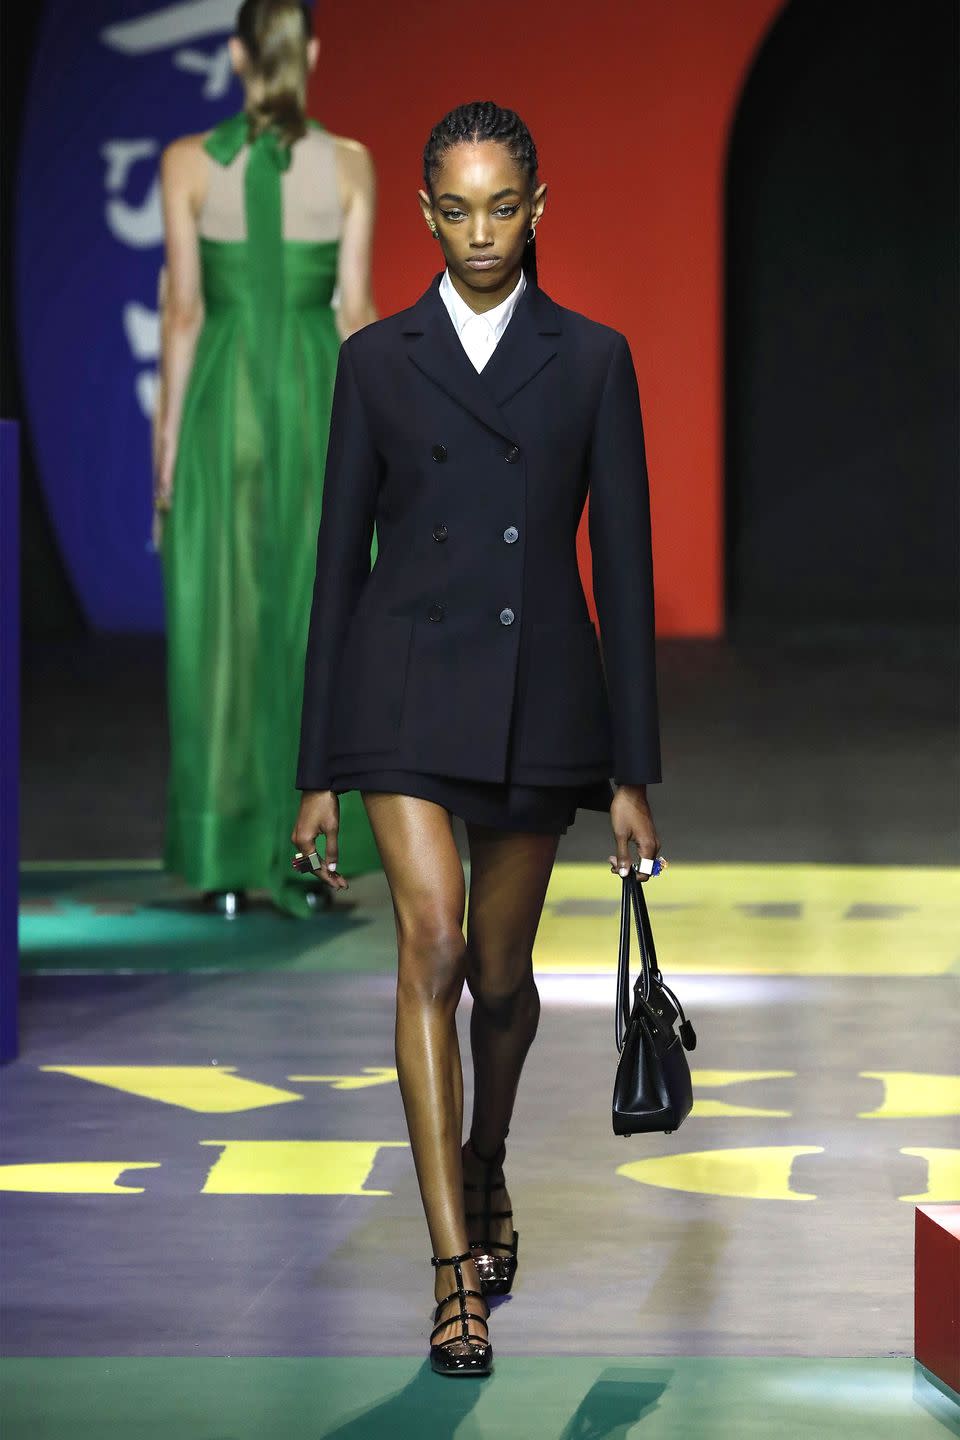 <p>Maria Grazia Chiuri delved back into the extensive Dior archives for Spring 22, and to Marc Bohan’s long tenure with the storied house. Zeroing in even further, Chiuri turns to the Slim Look collection,<br>presented in 1961. At the time of its release, the press said “It completely changes fashion, just as the New Look did in 1947." In other words, it was a moment. The show took place on a graphic, color-blocked set conceived by artist Anna Paparatti<em>.</em> The looks themselves followed that colorful spirit —leveraging yellow, green, red, navy, orange, and raspberry on little skirt suits, along fun, fringe dresses inspired by the iconic Roman nightclub the Piper Club. There is also a range of bright, boxing inspired looks, bold prints, like that found on a silk maxi skirt paired with a sheer black blouse, and louche denim suiting. Overall, the collection is inspired by...nonsense? As the show notes explain, Grazia Chiuri looked to Anna Paparatti’s Il Gioco del Nonsense (The Game of Nonsense). Nonsense, as the American poet and literary critic Susan Stewart saw it, is “perfect, pure, an untouched surface of meaning whose every gesture is reflexive." Maybe something a little like boxing? -<em>Kerry Pieri</em><br><br></p>